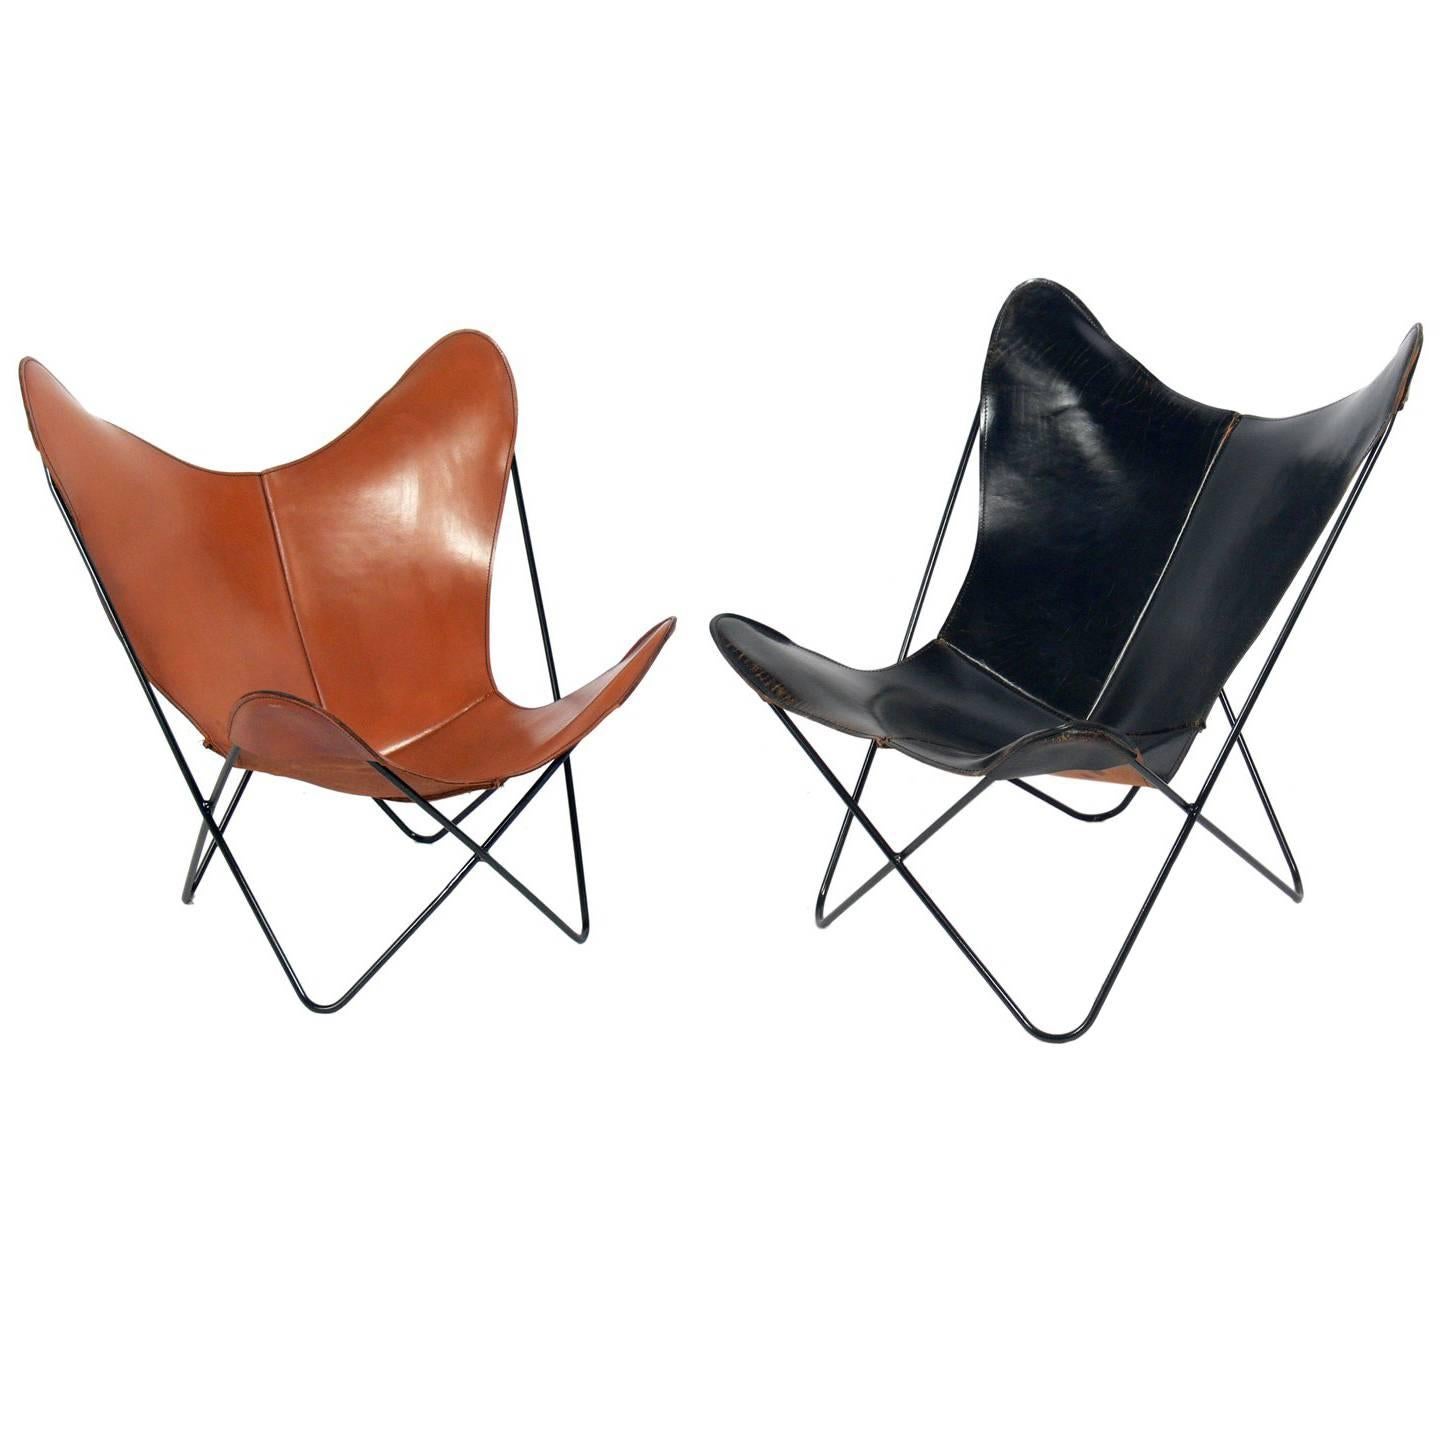 Sculptural Leather Butterfly Chairs Designed by Jorge Ferrari-Hardoy